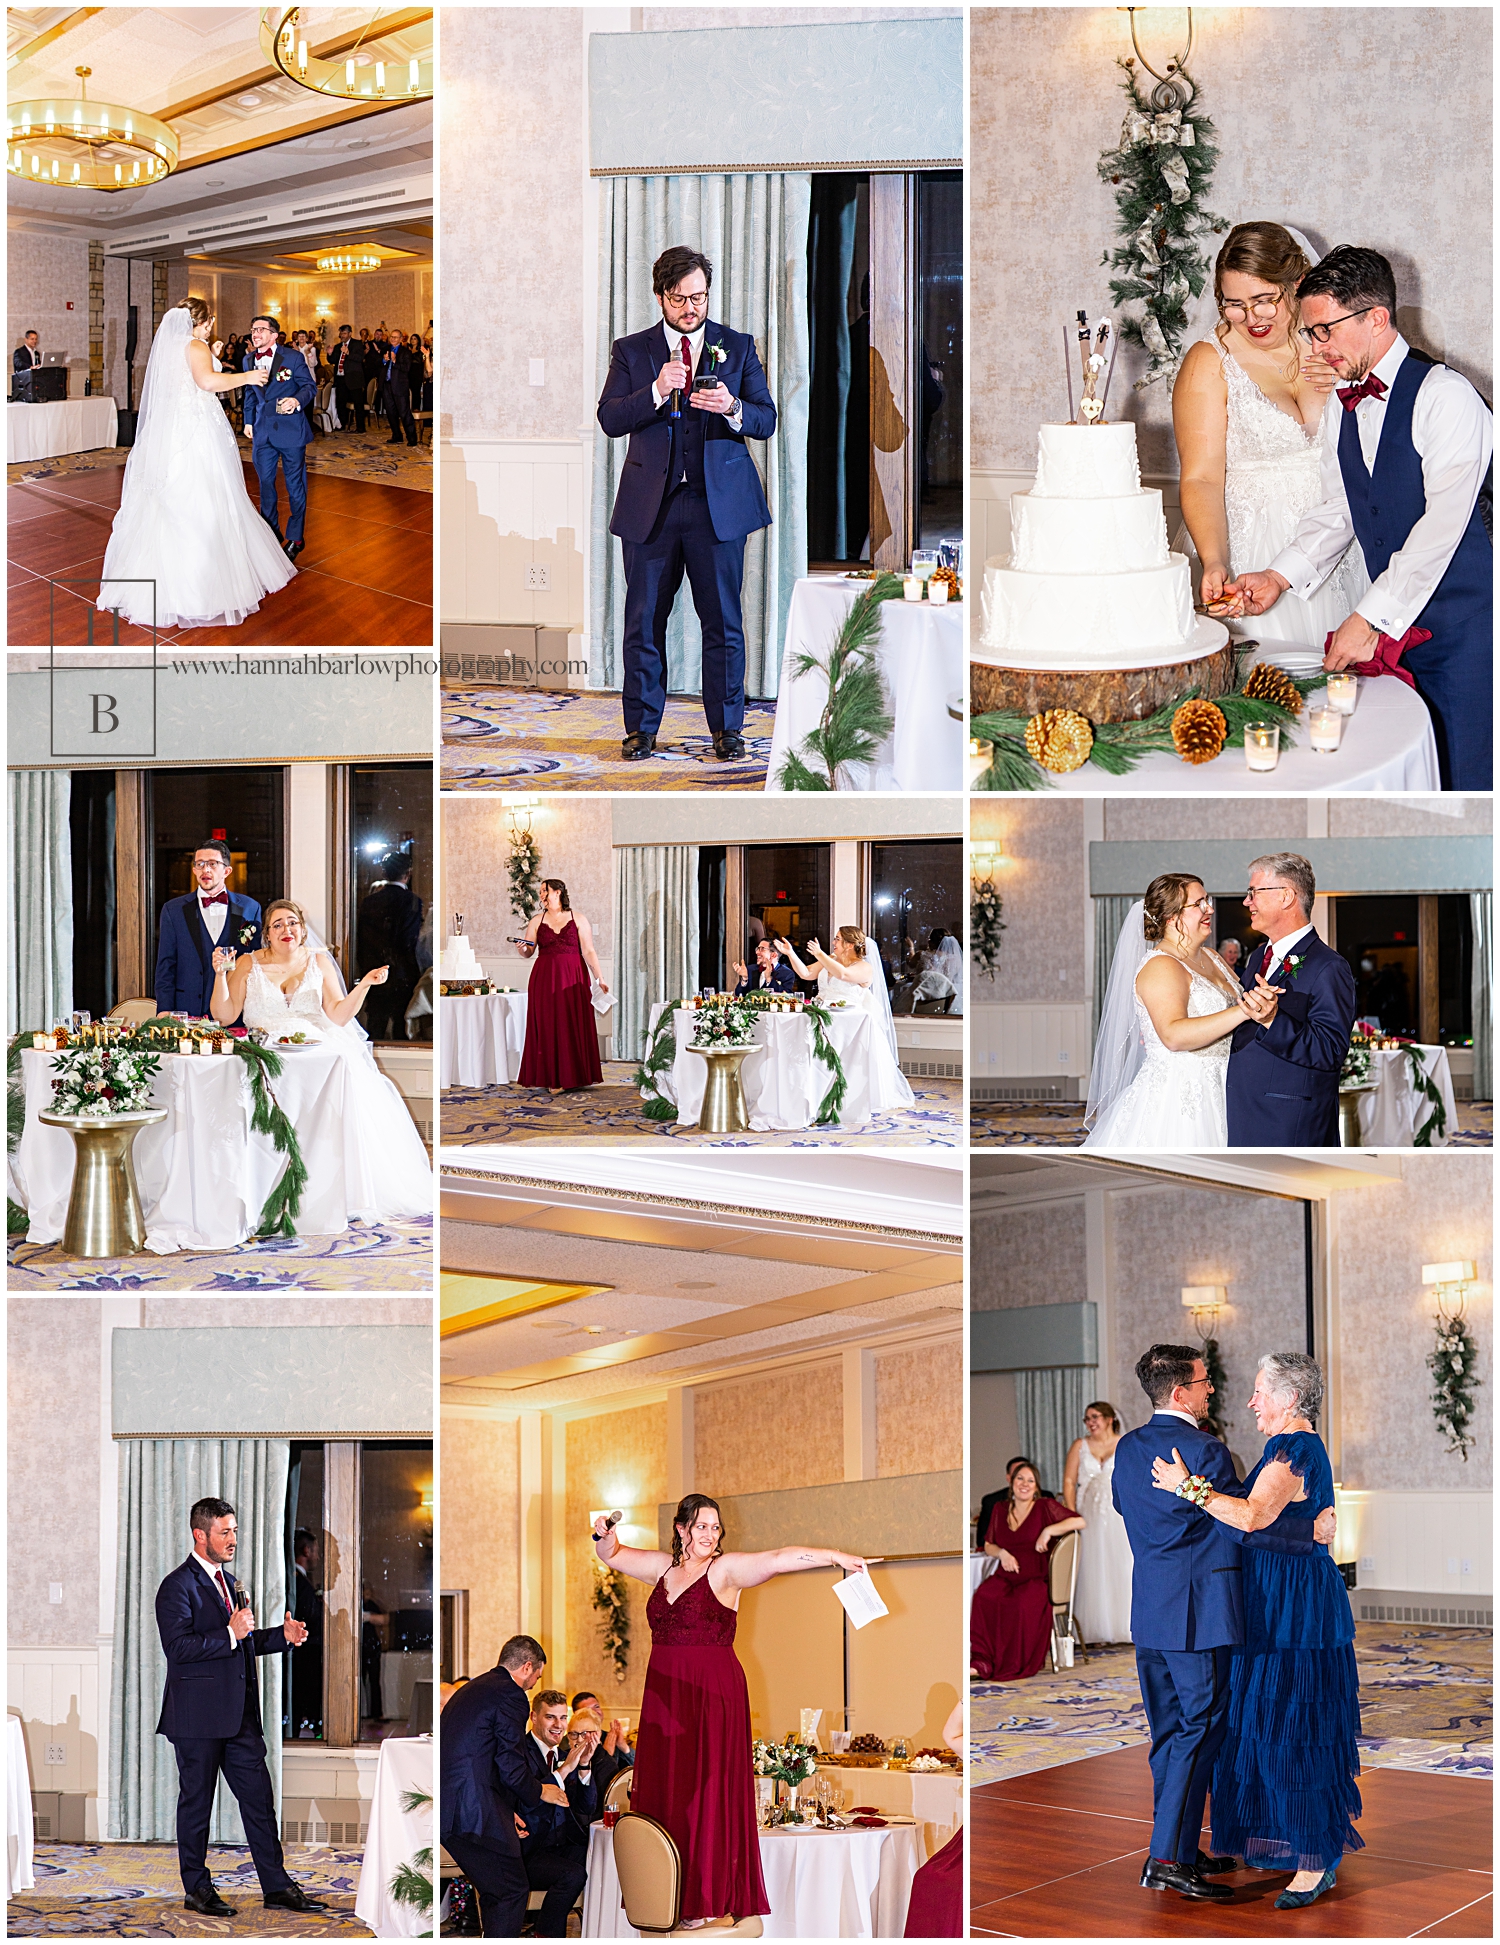 Key wedding reception events are highlighted in collage